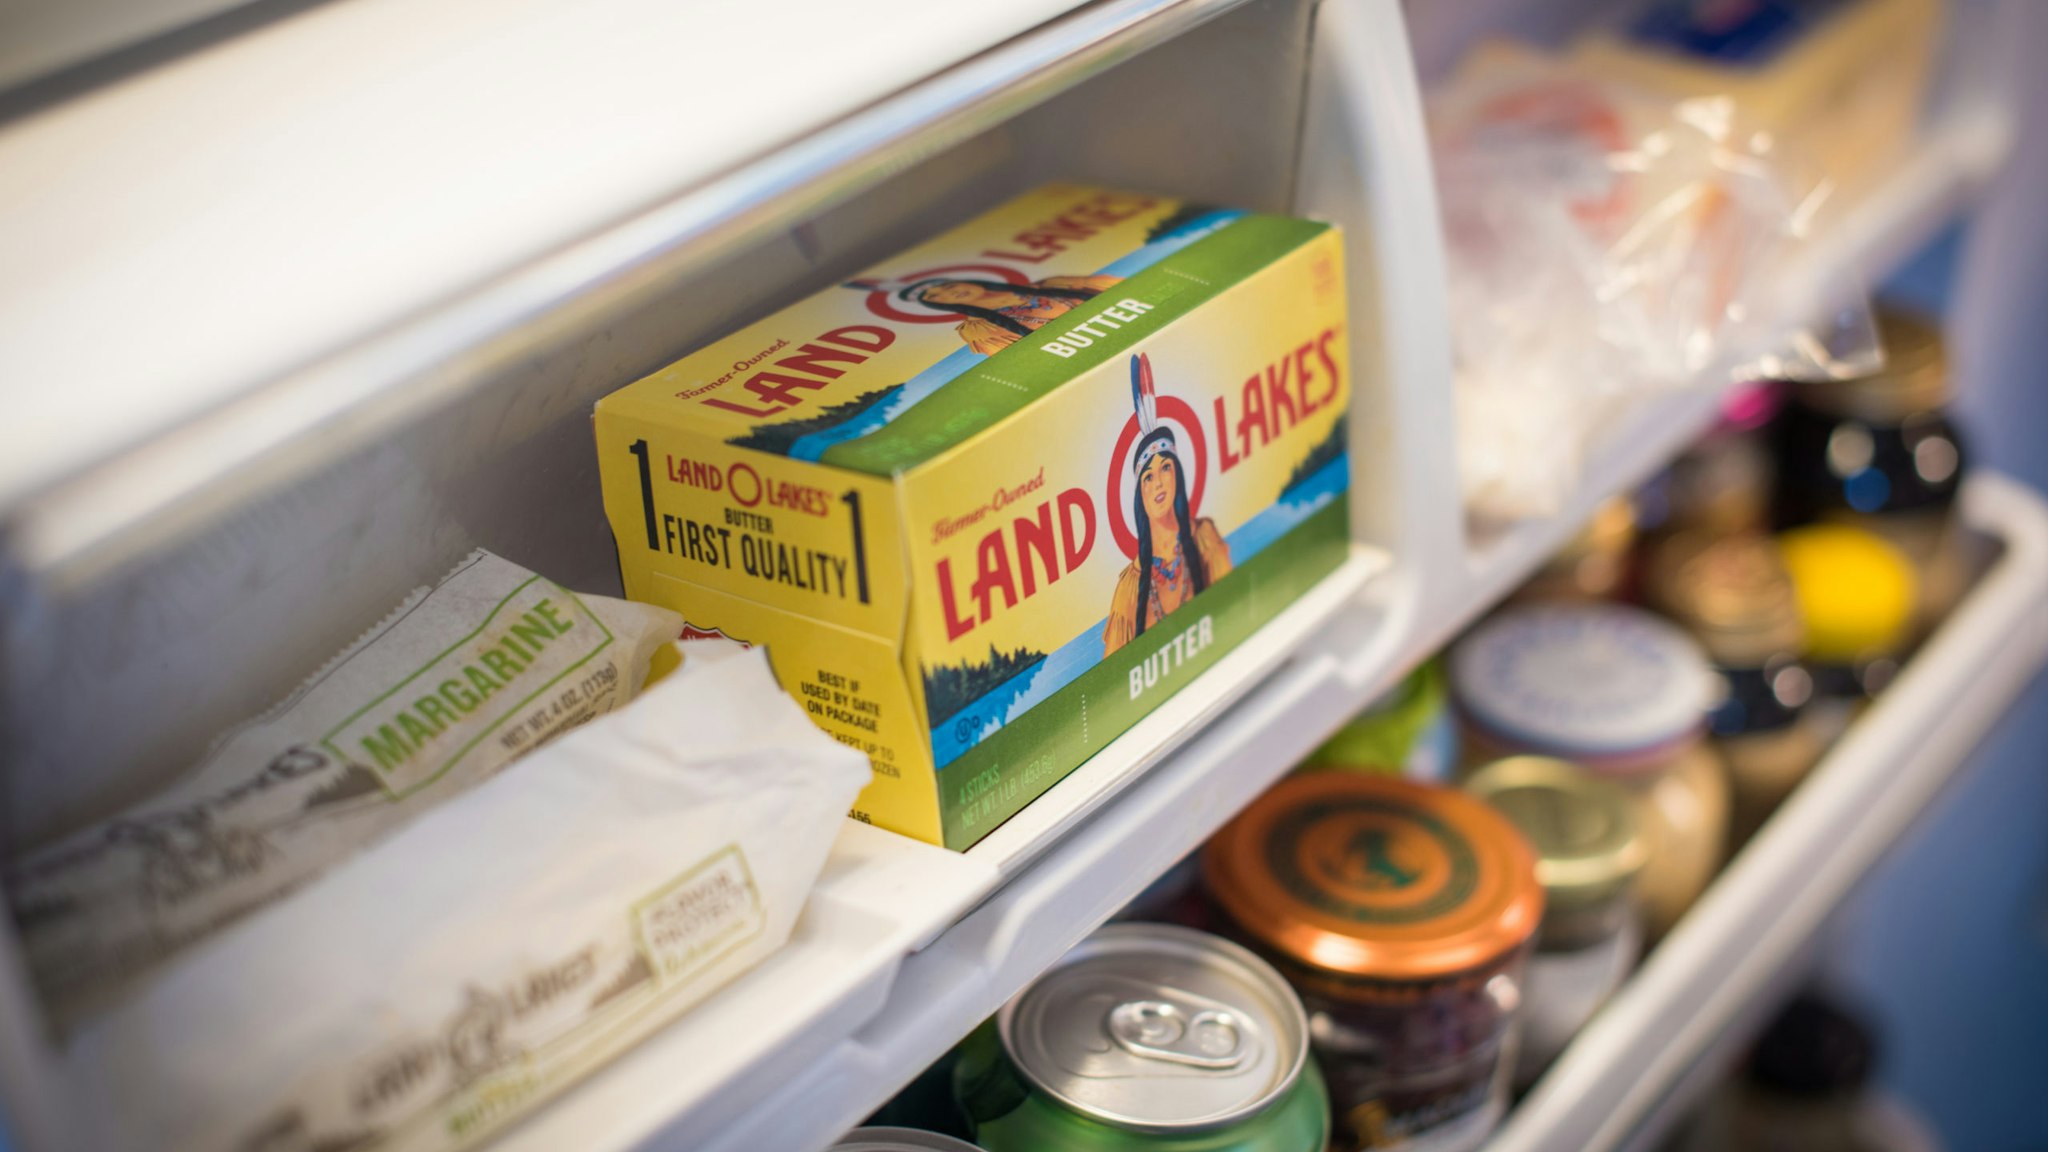 container of Land O'Lakes Inc. brand butter is displayed for a photograph in Dobbs Ferry, New York, U.S., on Wednesday, Feb. 20, 2019. With 2018 annual sales of $15 billion, Land O'Lakes is one of the nation's largest cooperatives. Photographer: Tiffany Hagler-Geard/Bloomberg